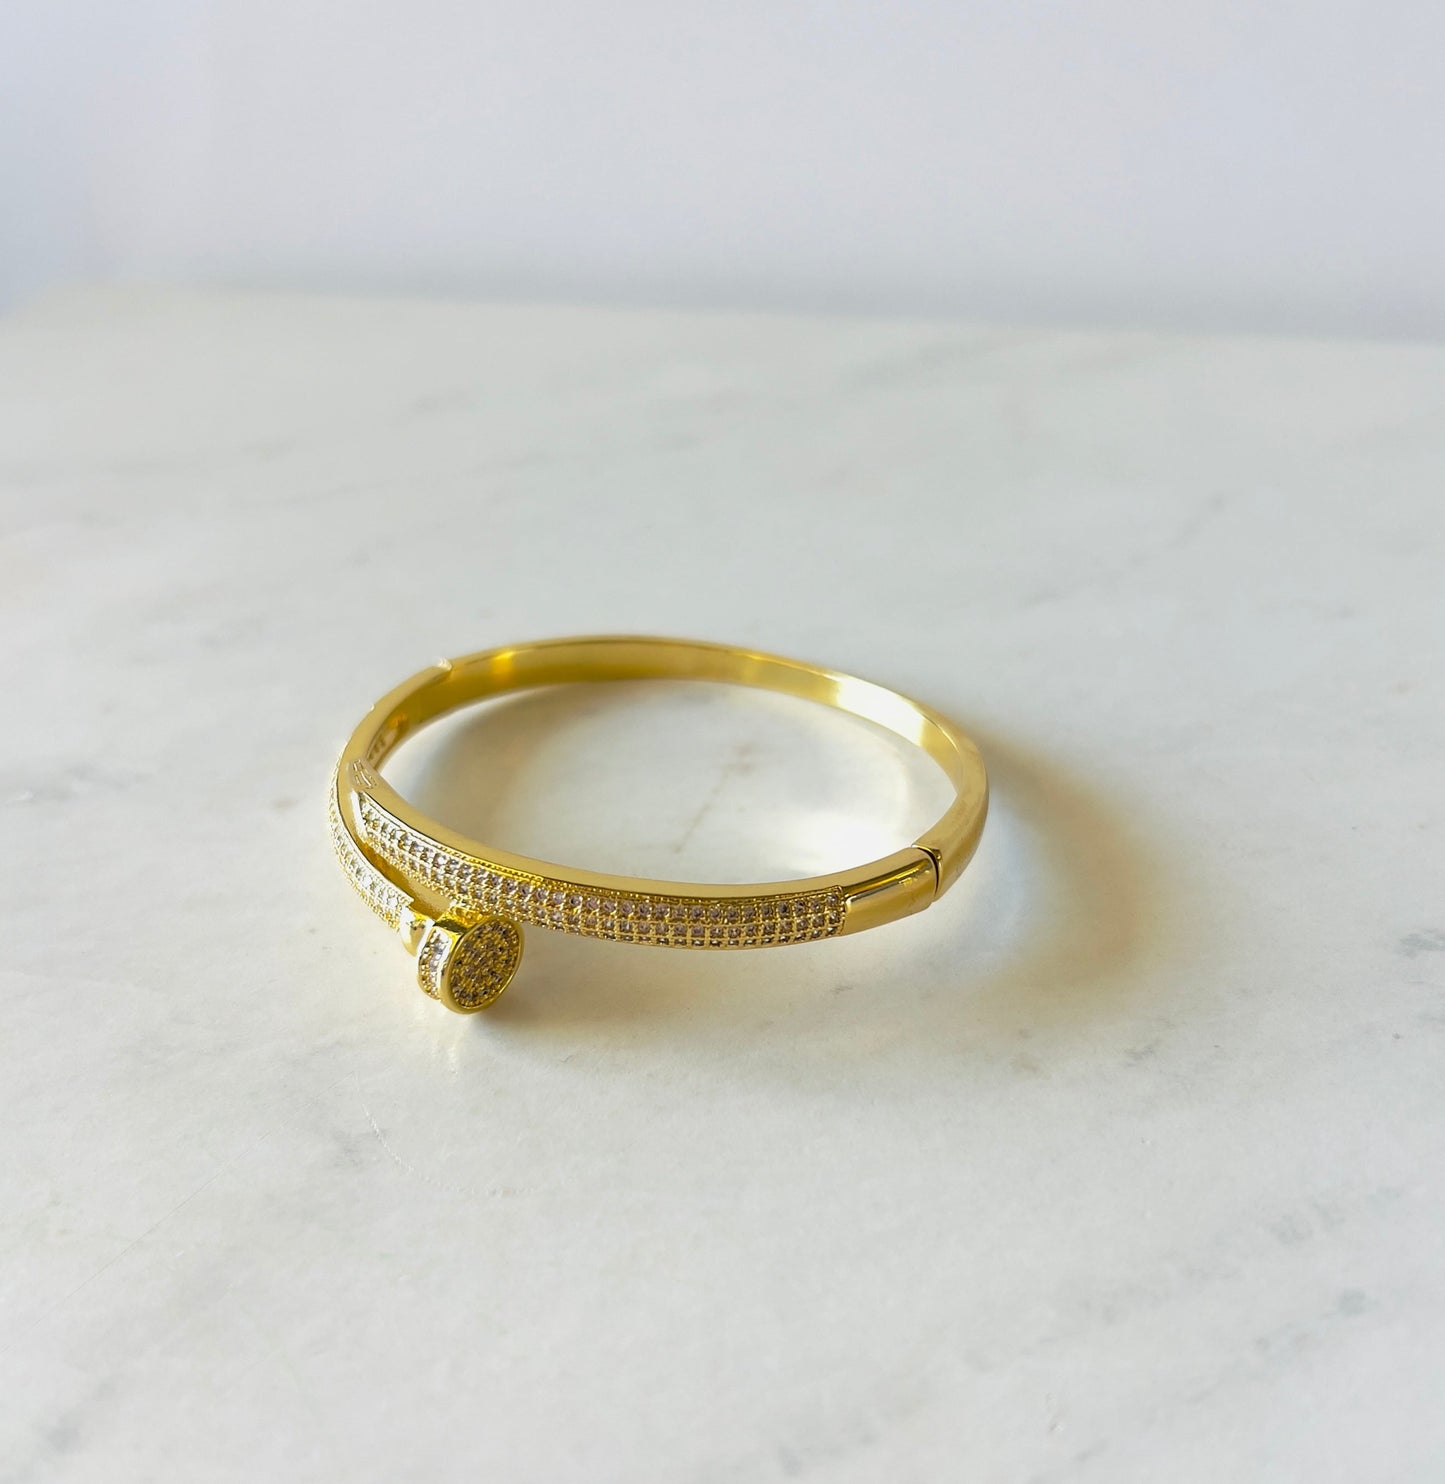 trendy nail shape bangle in gold on white surface